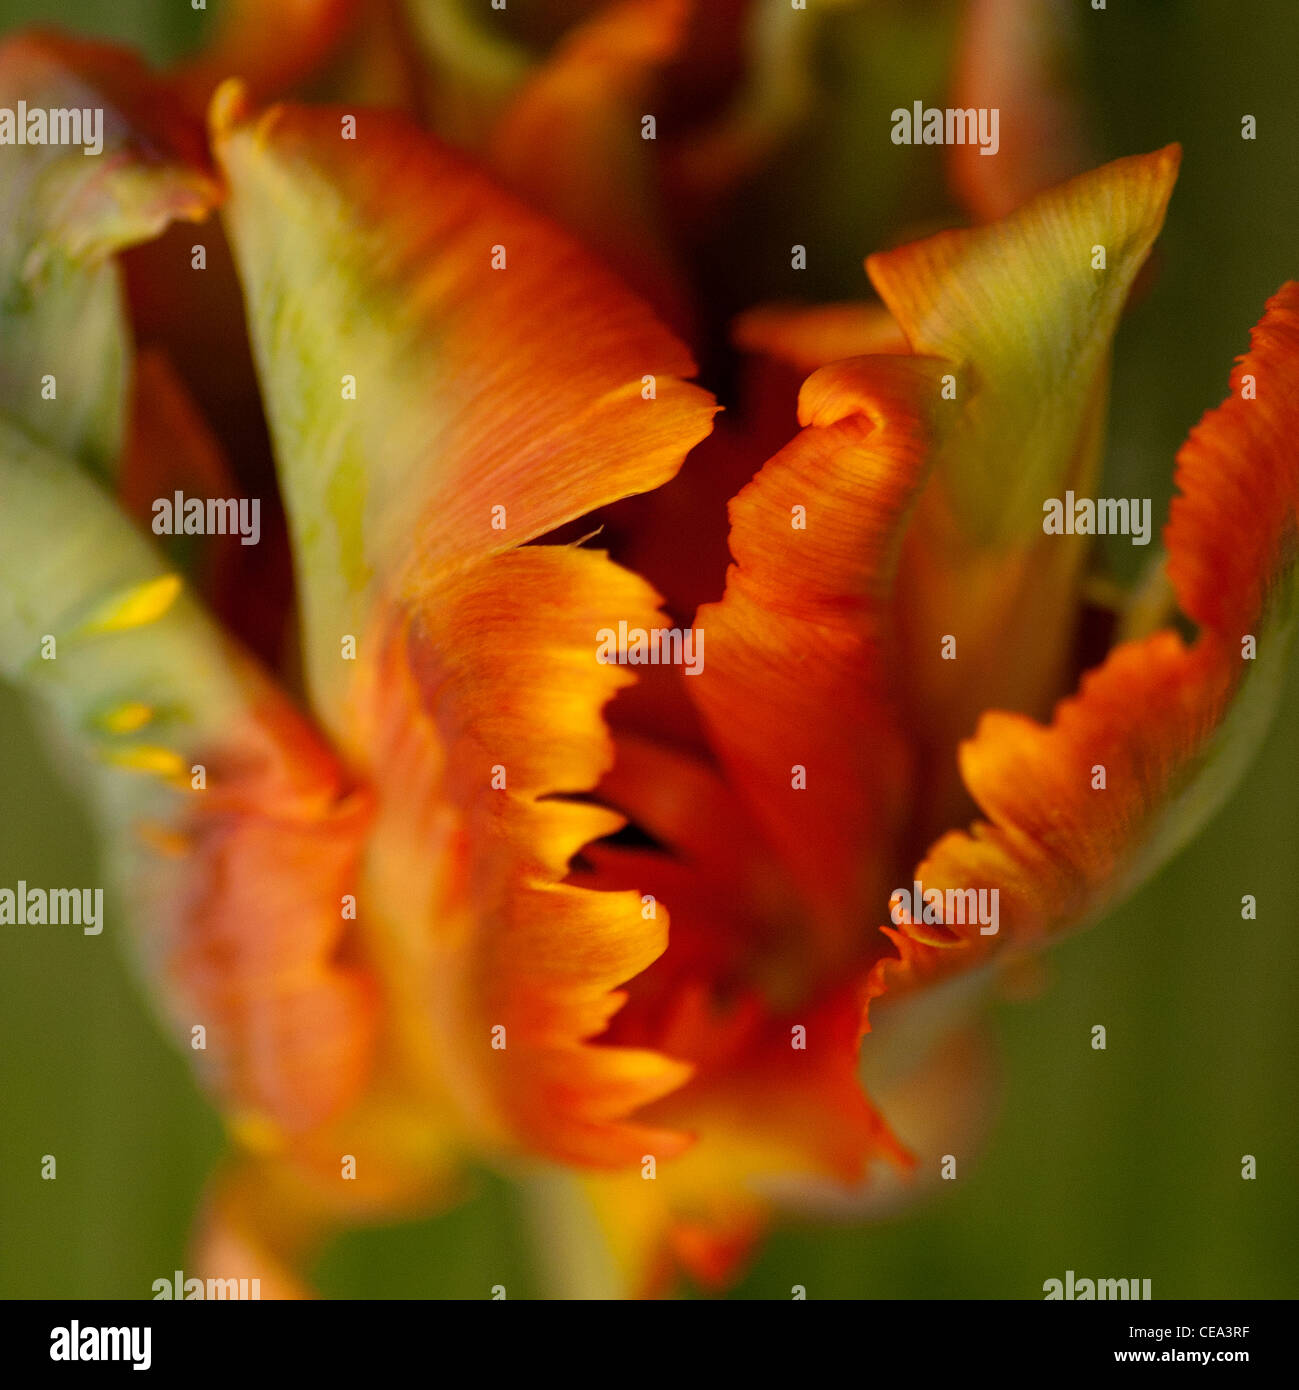 Tulipia. Macro photography. Beautiful parrot tulip, showing the vibrant color and delicate folding curves of the petals. Stock Photo